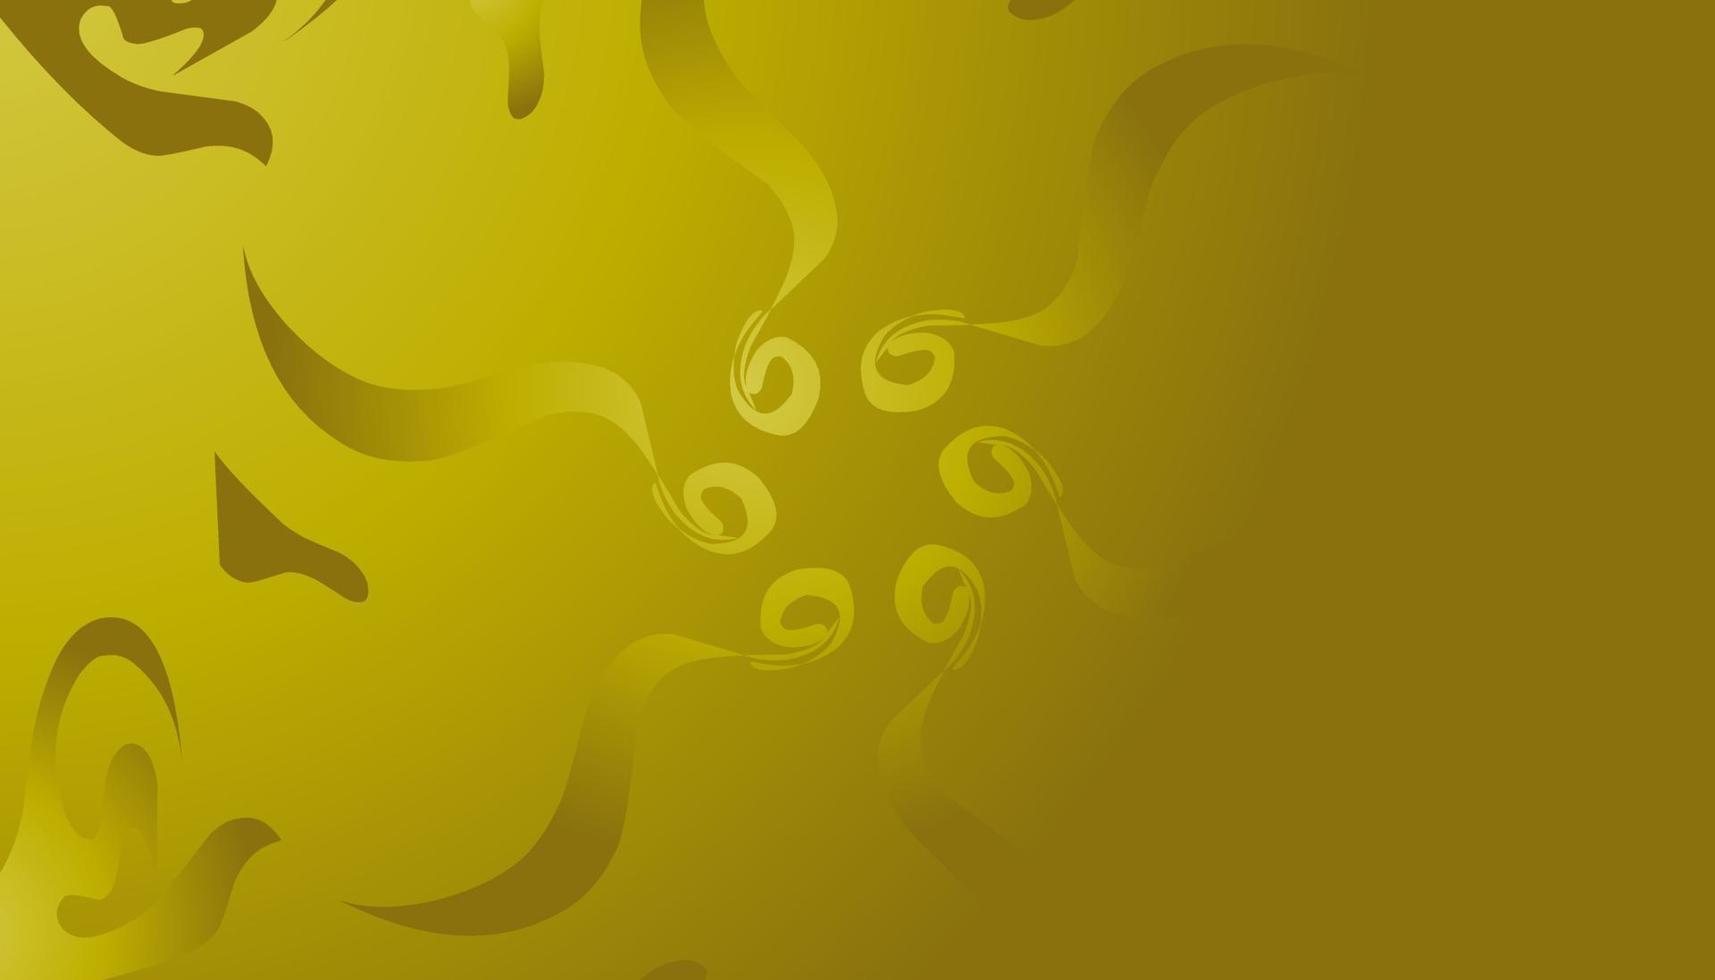 Abstract background with luxurious and elegant yellow gold color. vector